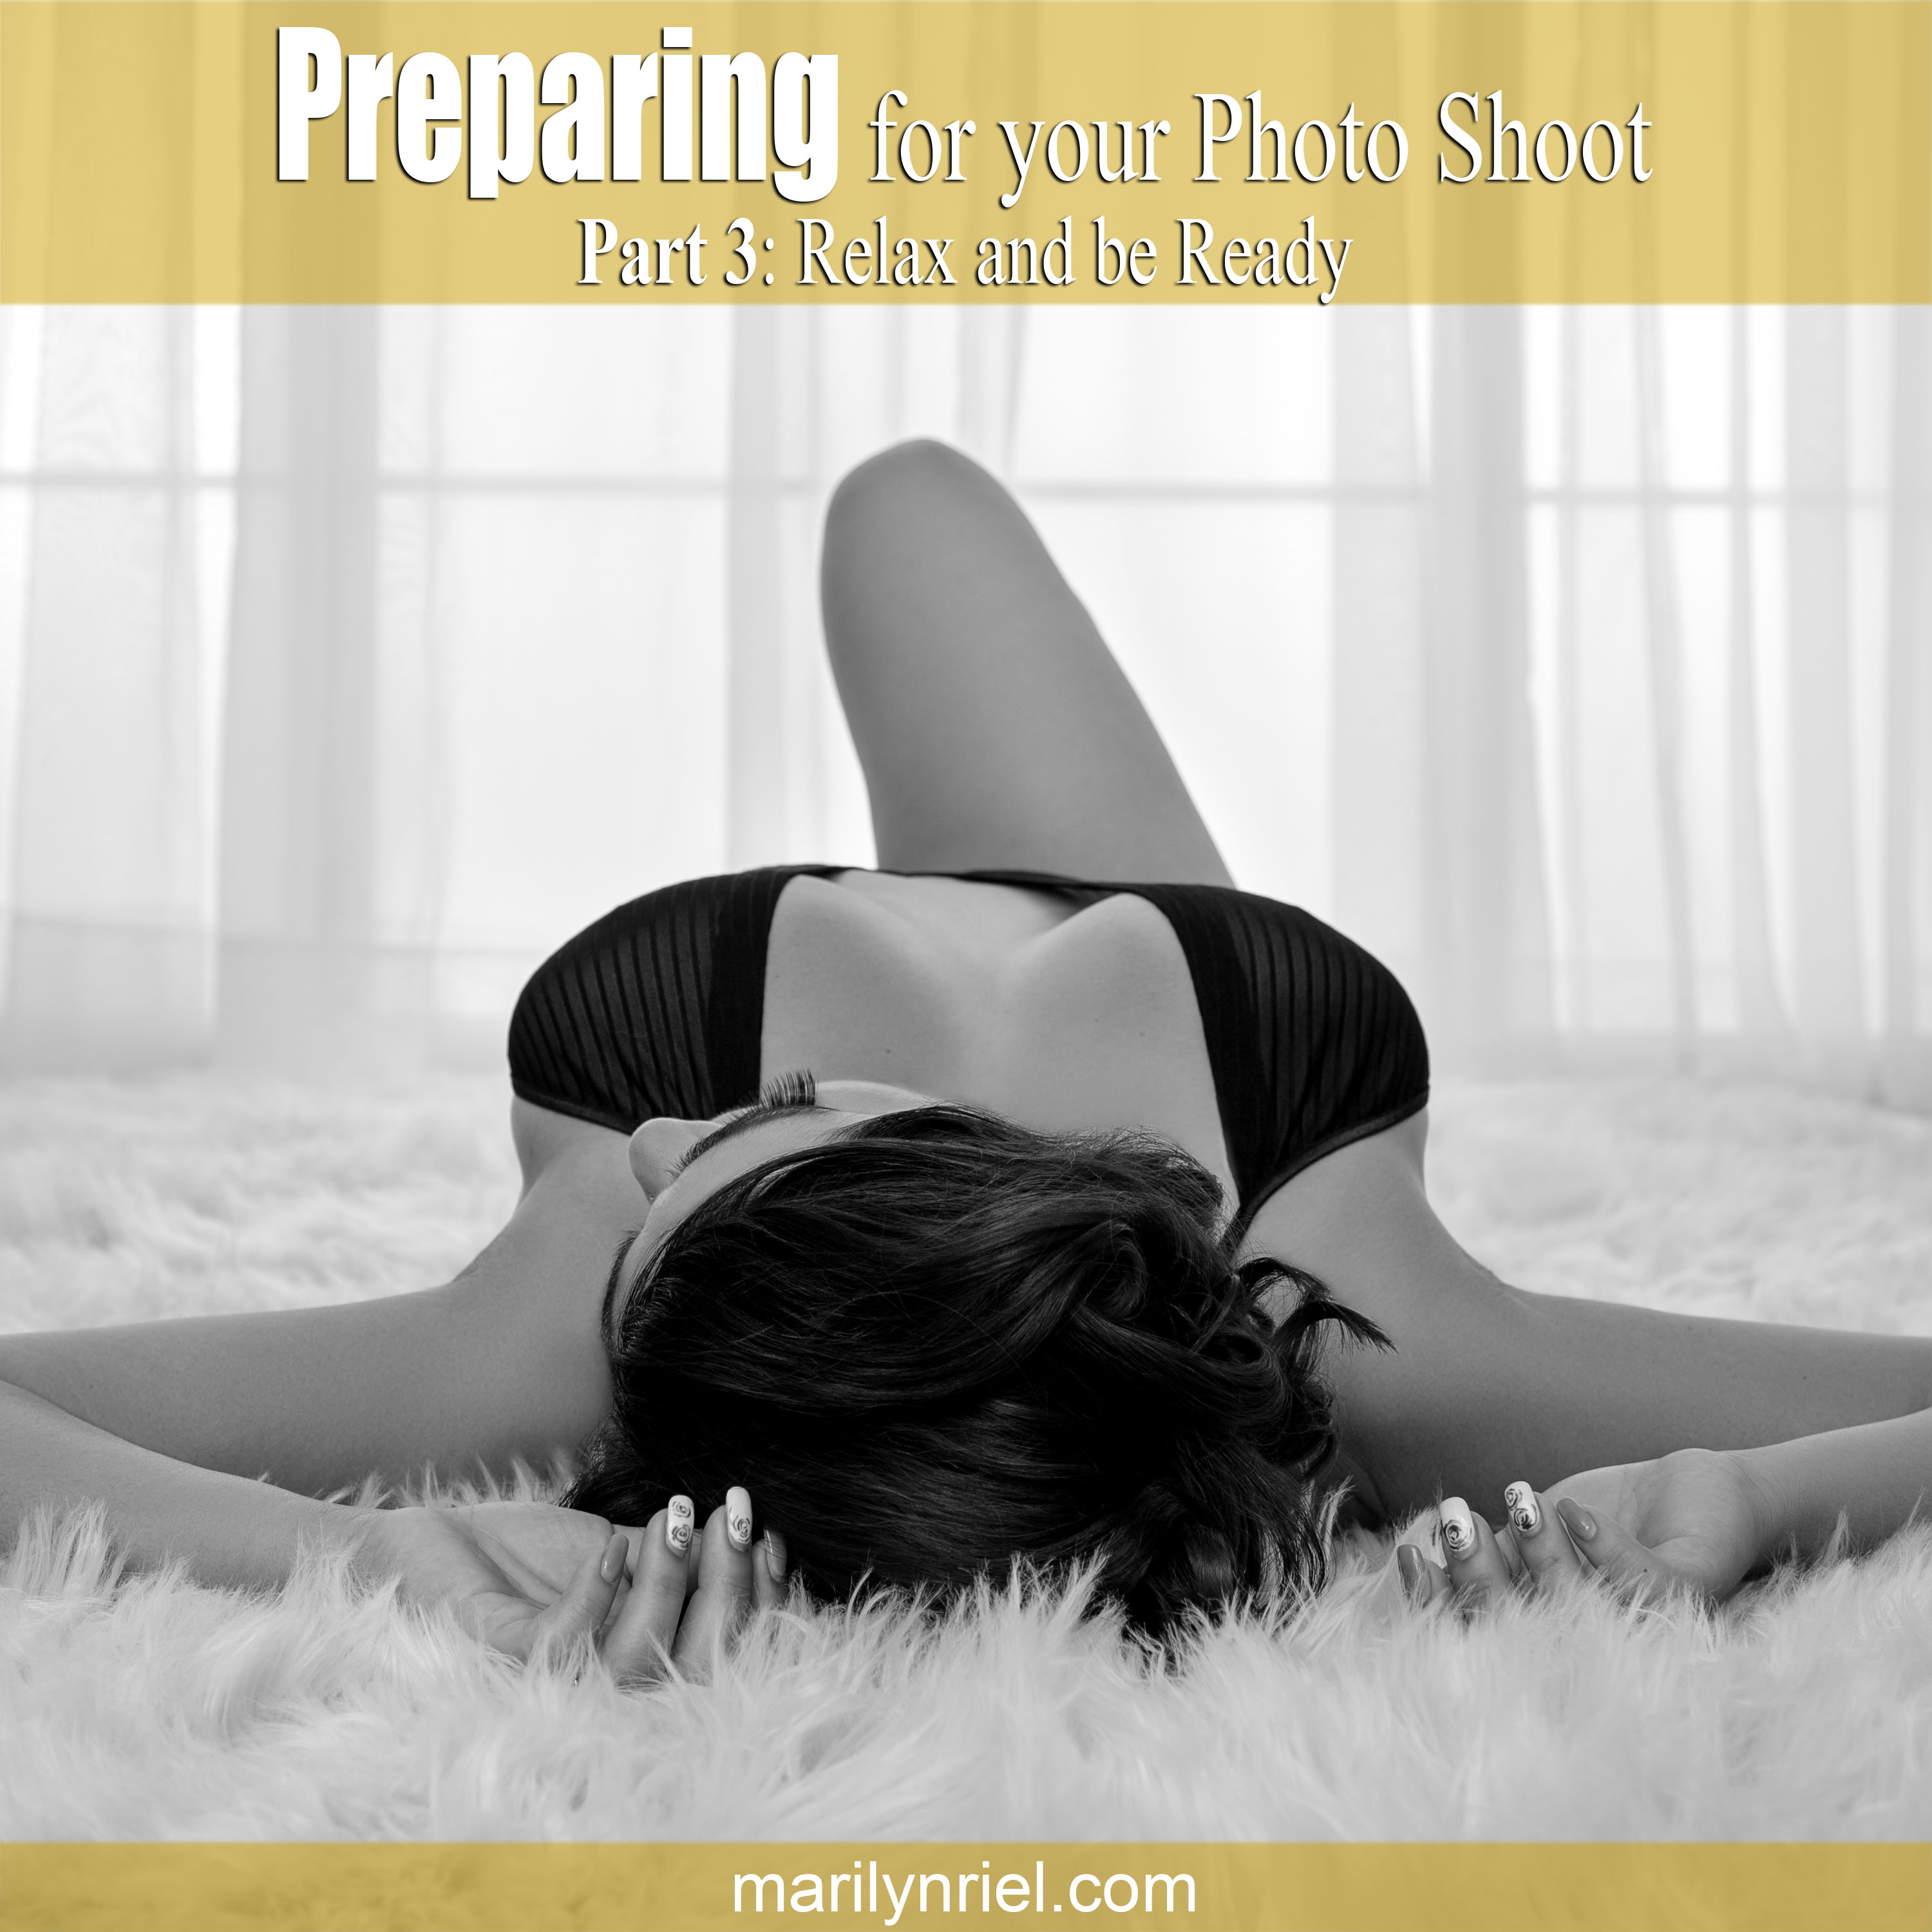 Preparing for your photo shoot relax and be ready